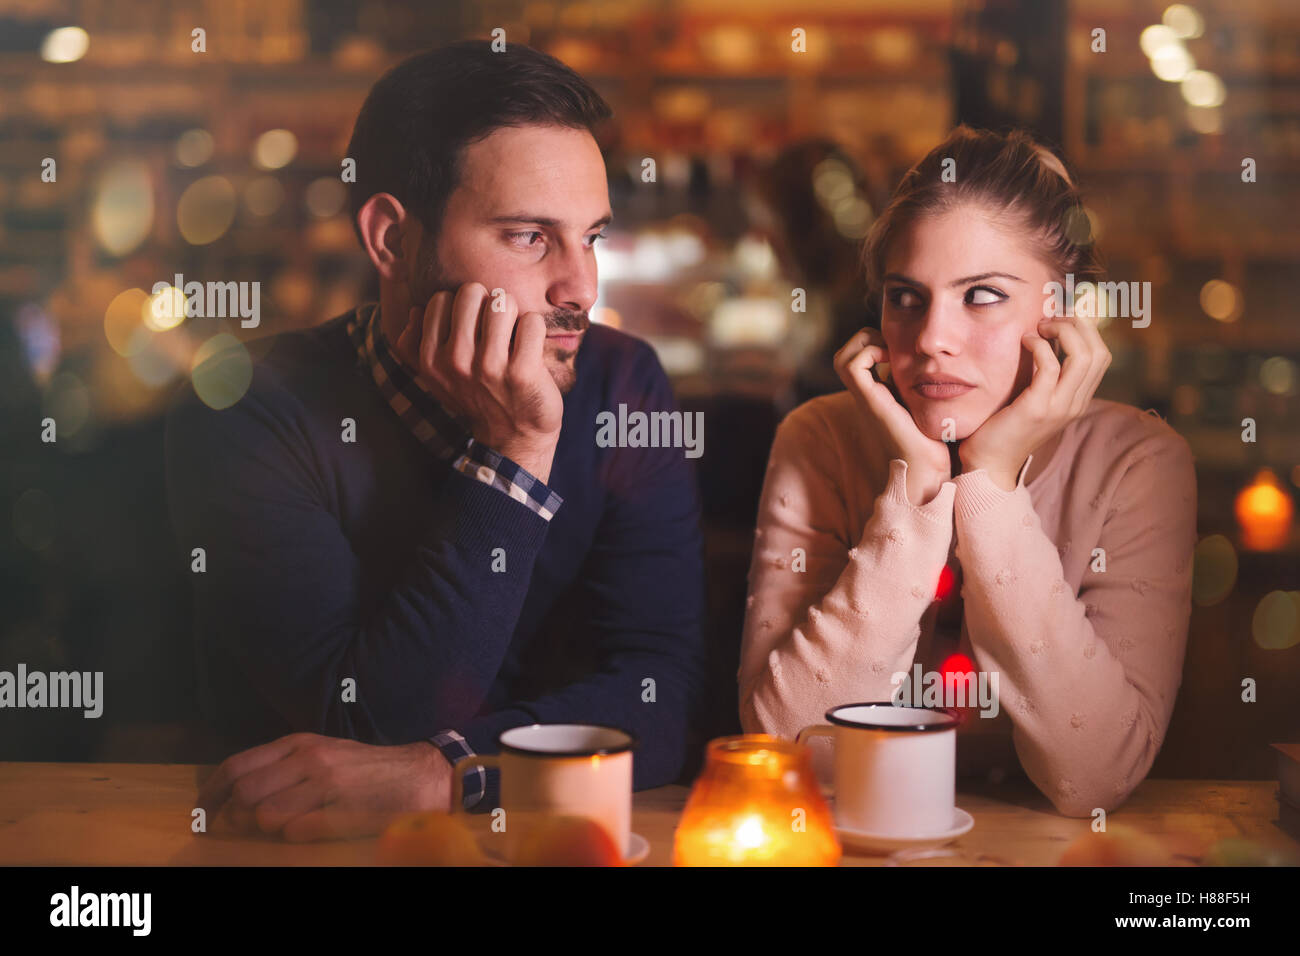 Sad couple having a conflict and relationship problems Stock Photo